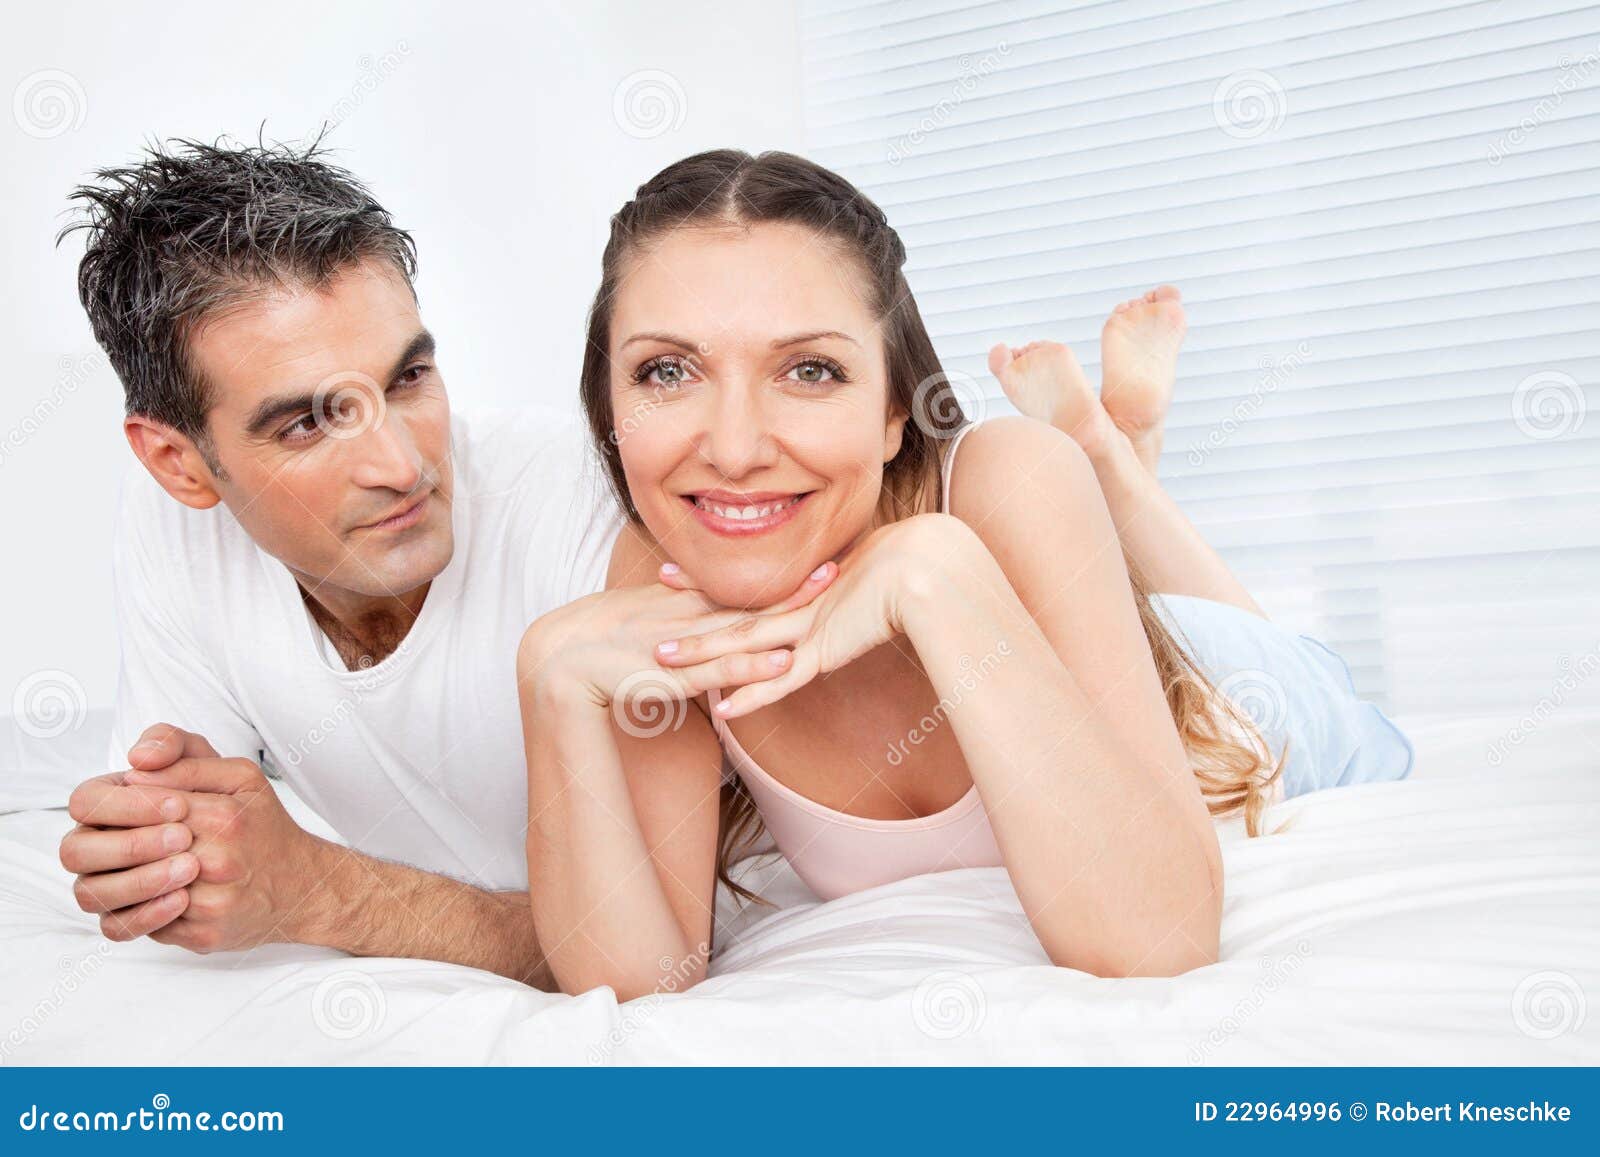 Happy Married Couple In Bed Royalty Free Stock Image Image 22964996 